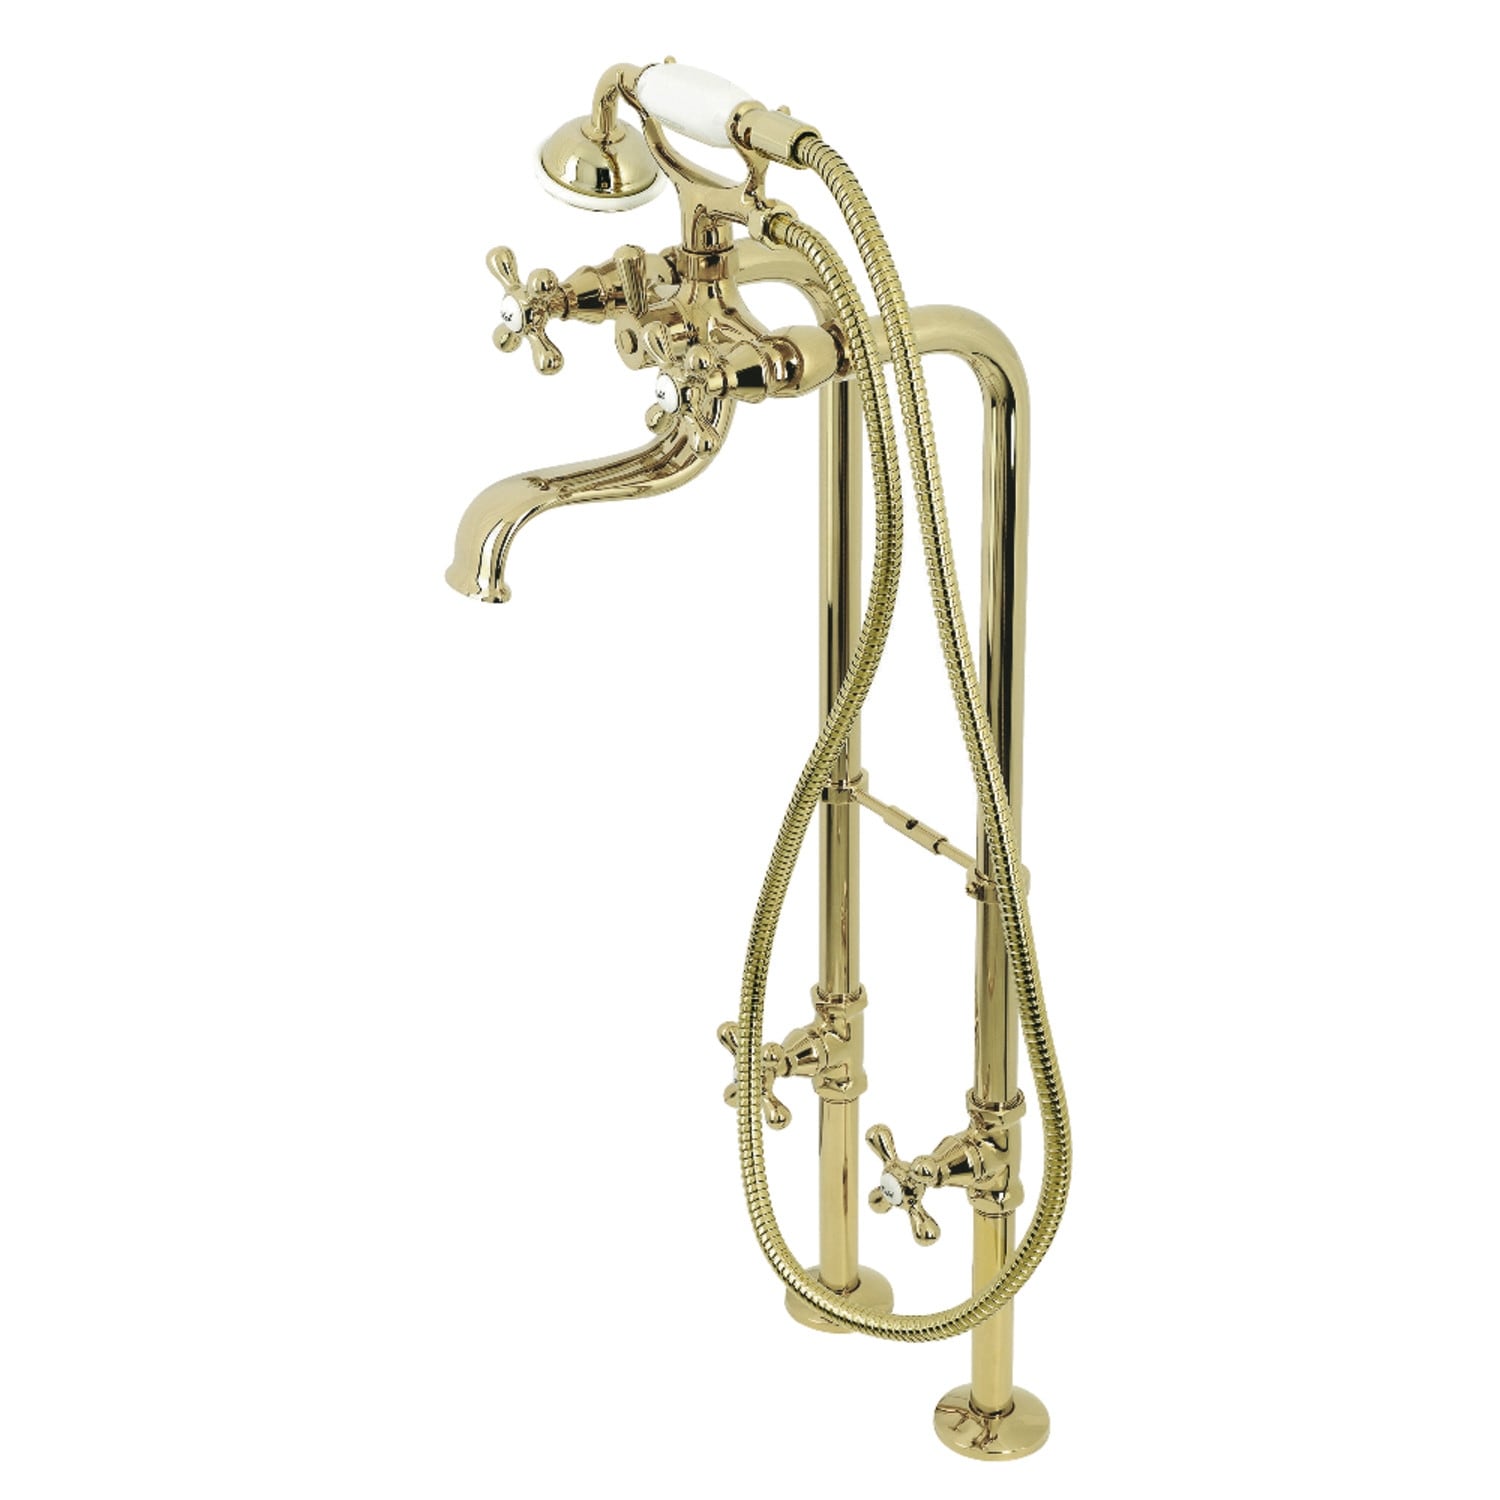 https://ak1.ostkcdn.com/images/products/is/images/direct/a87f784fca20590c9316a68b65202ba7396af9ee/Kingston-Brass-Freestanding-Clawfoot-Tub-Faucet-Package-with-Supply-Line.jpg